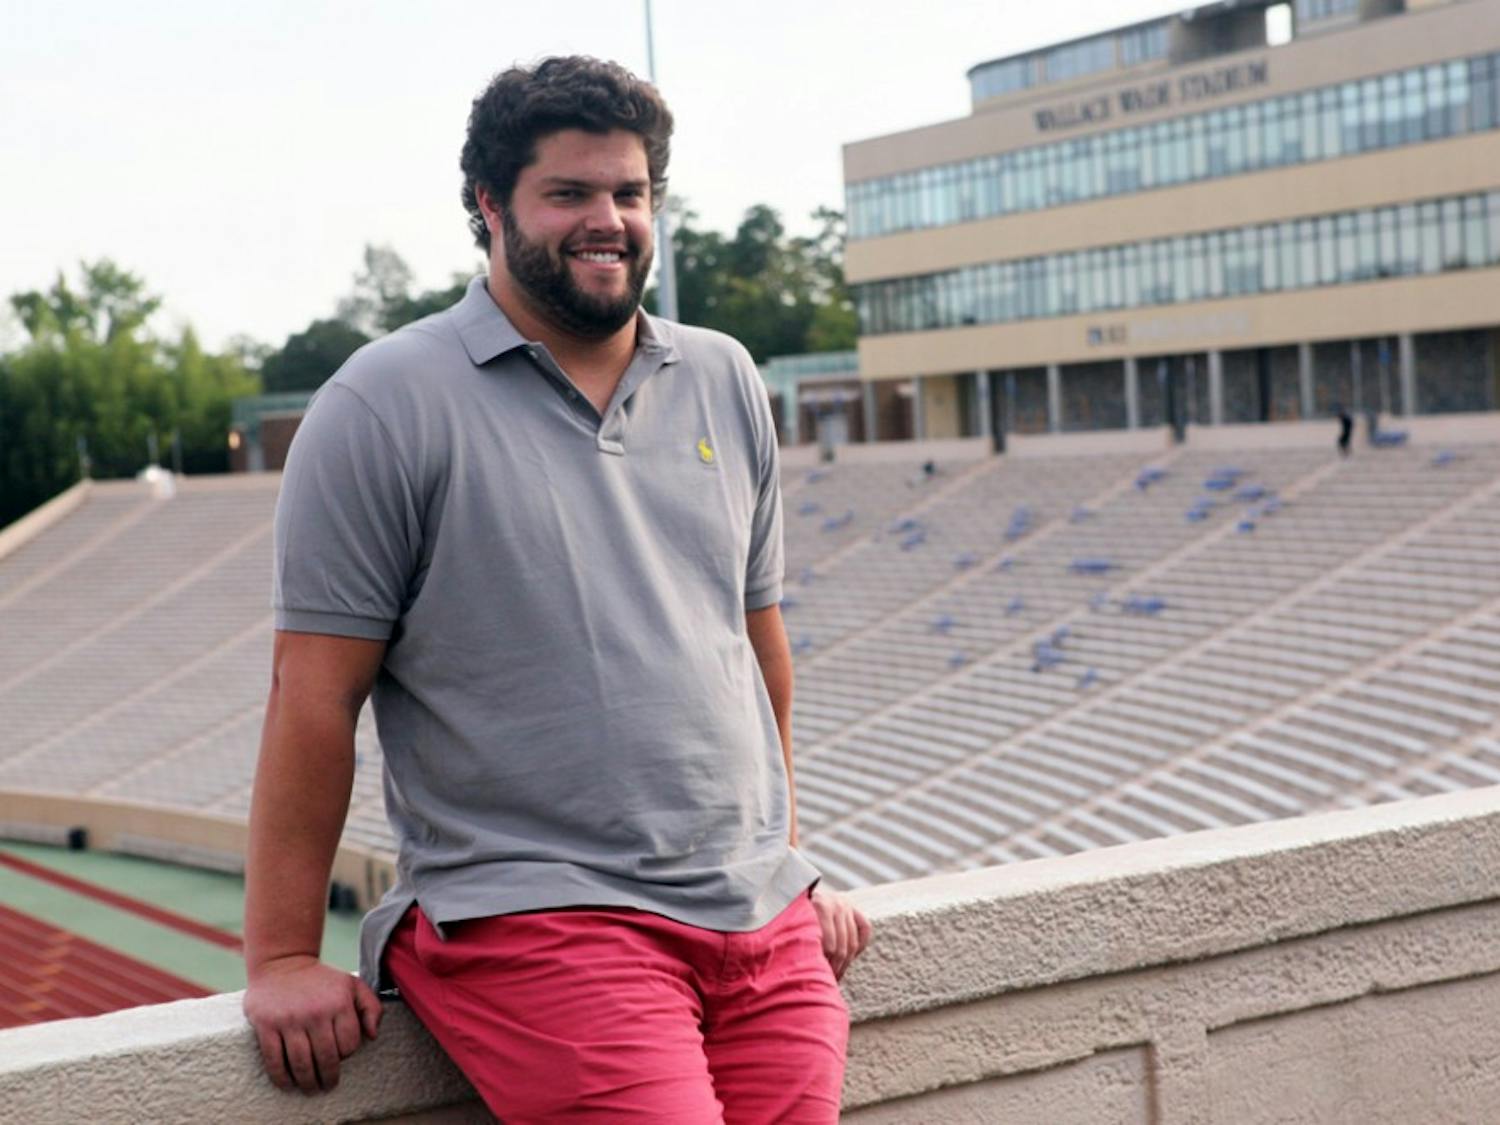 Senior Conor Irwin is conducting research on medial collateral ligament injuries, often sustained by offensive linemen—the position Irwin plays on the Duke football team